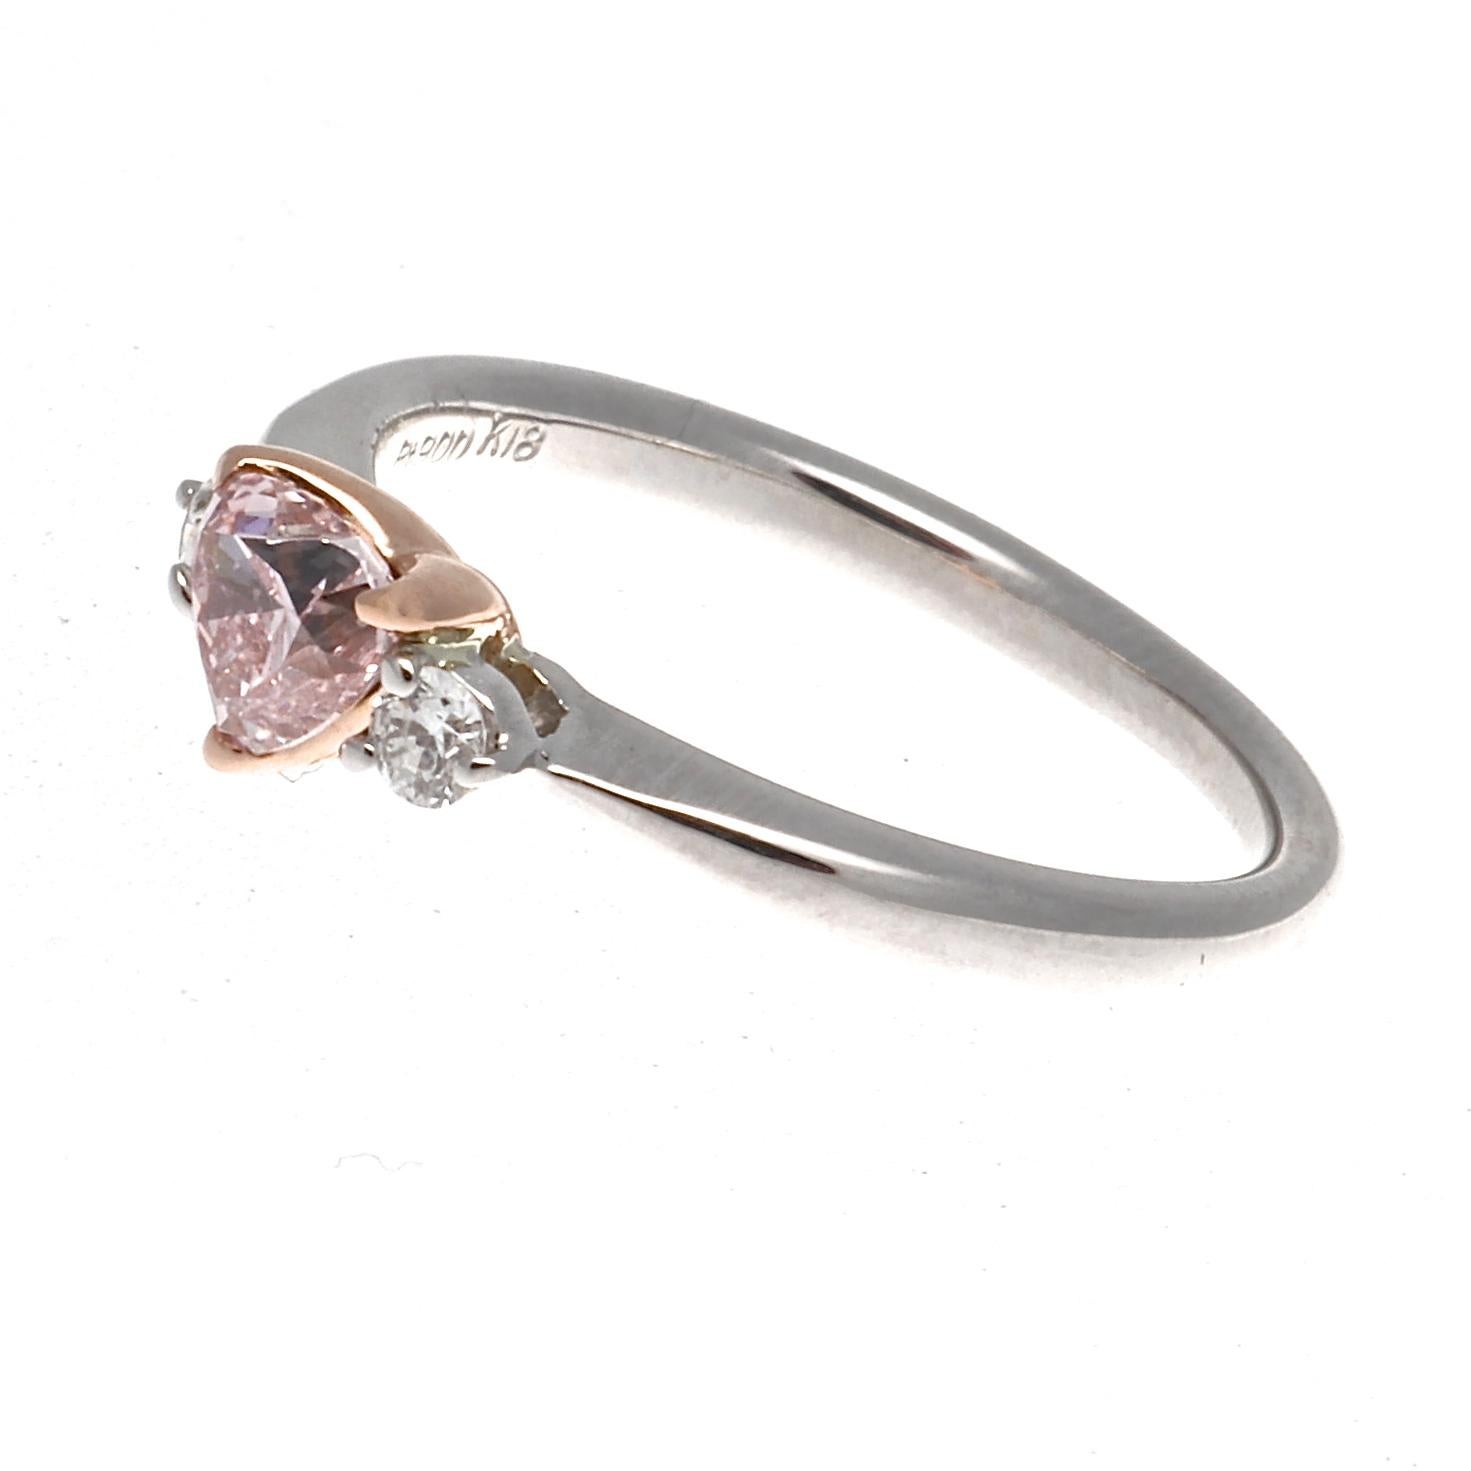 An alluring saturation of color emanates from this heart shape diamond. Featuring a GIA certified 0.45 carat heart shaped diamond that is a natural Fancy Orangy Pink color. Accented on either side by a single colorless round brilliant cut diamond.